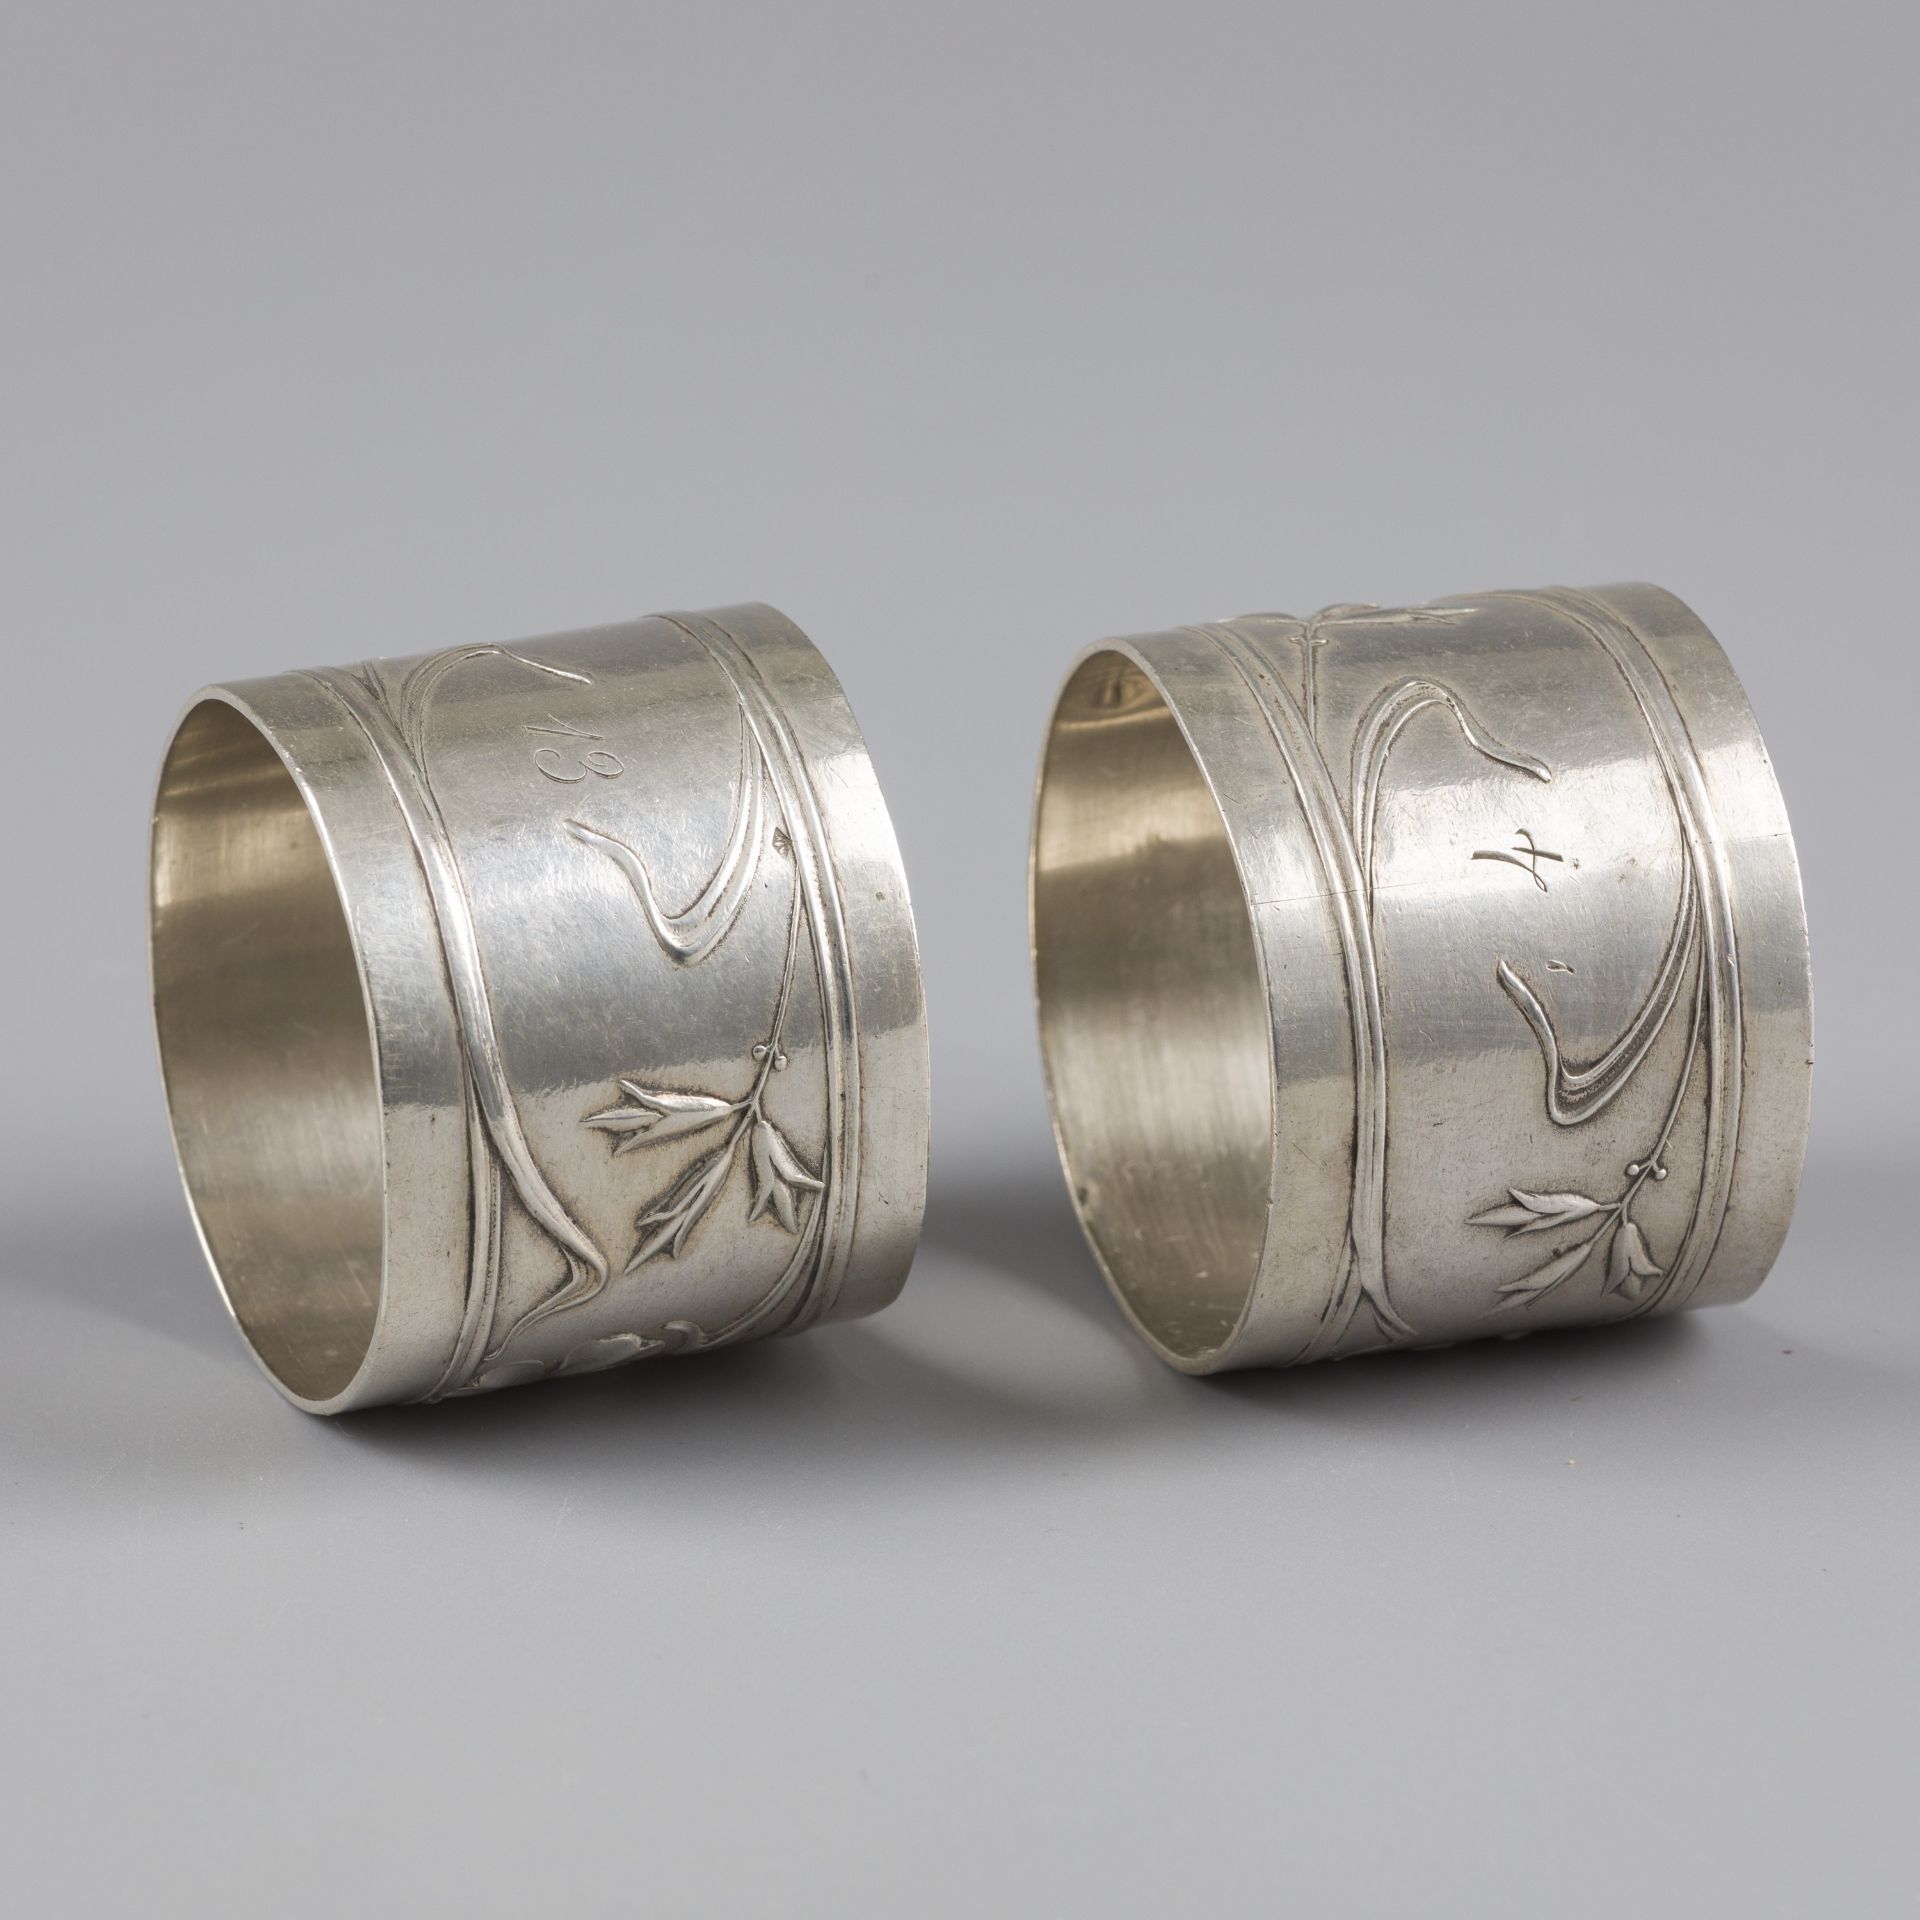 No reserve - 2-piece set of silver napkin rings. - Image 2 of 5